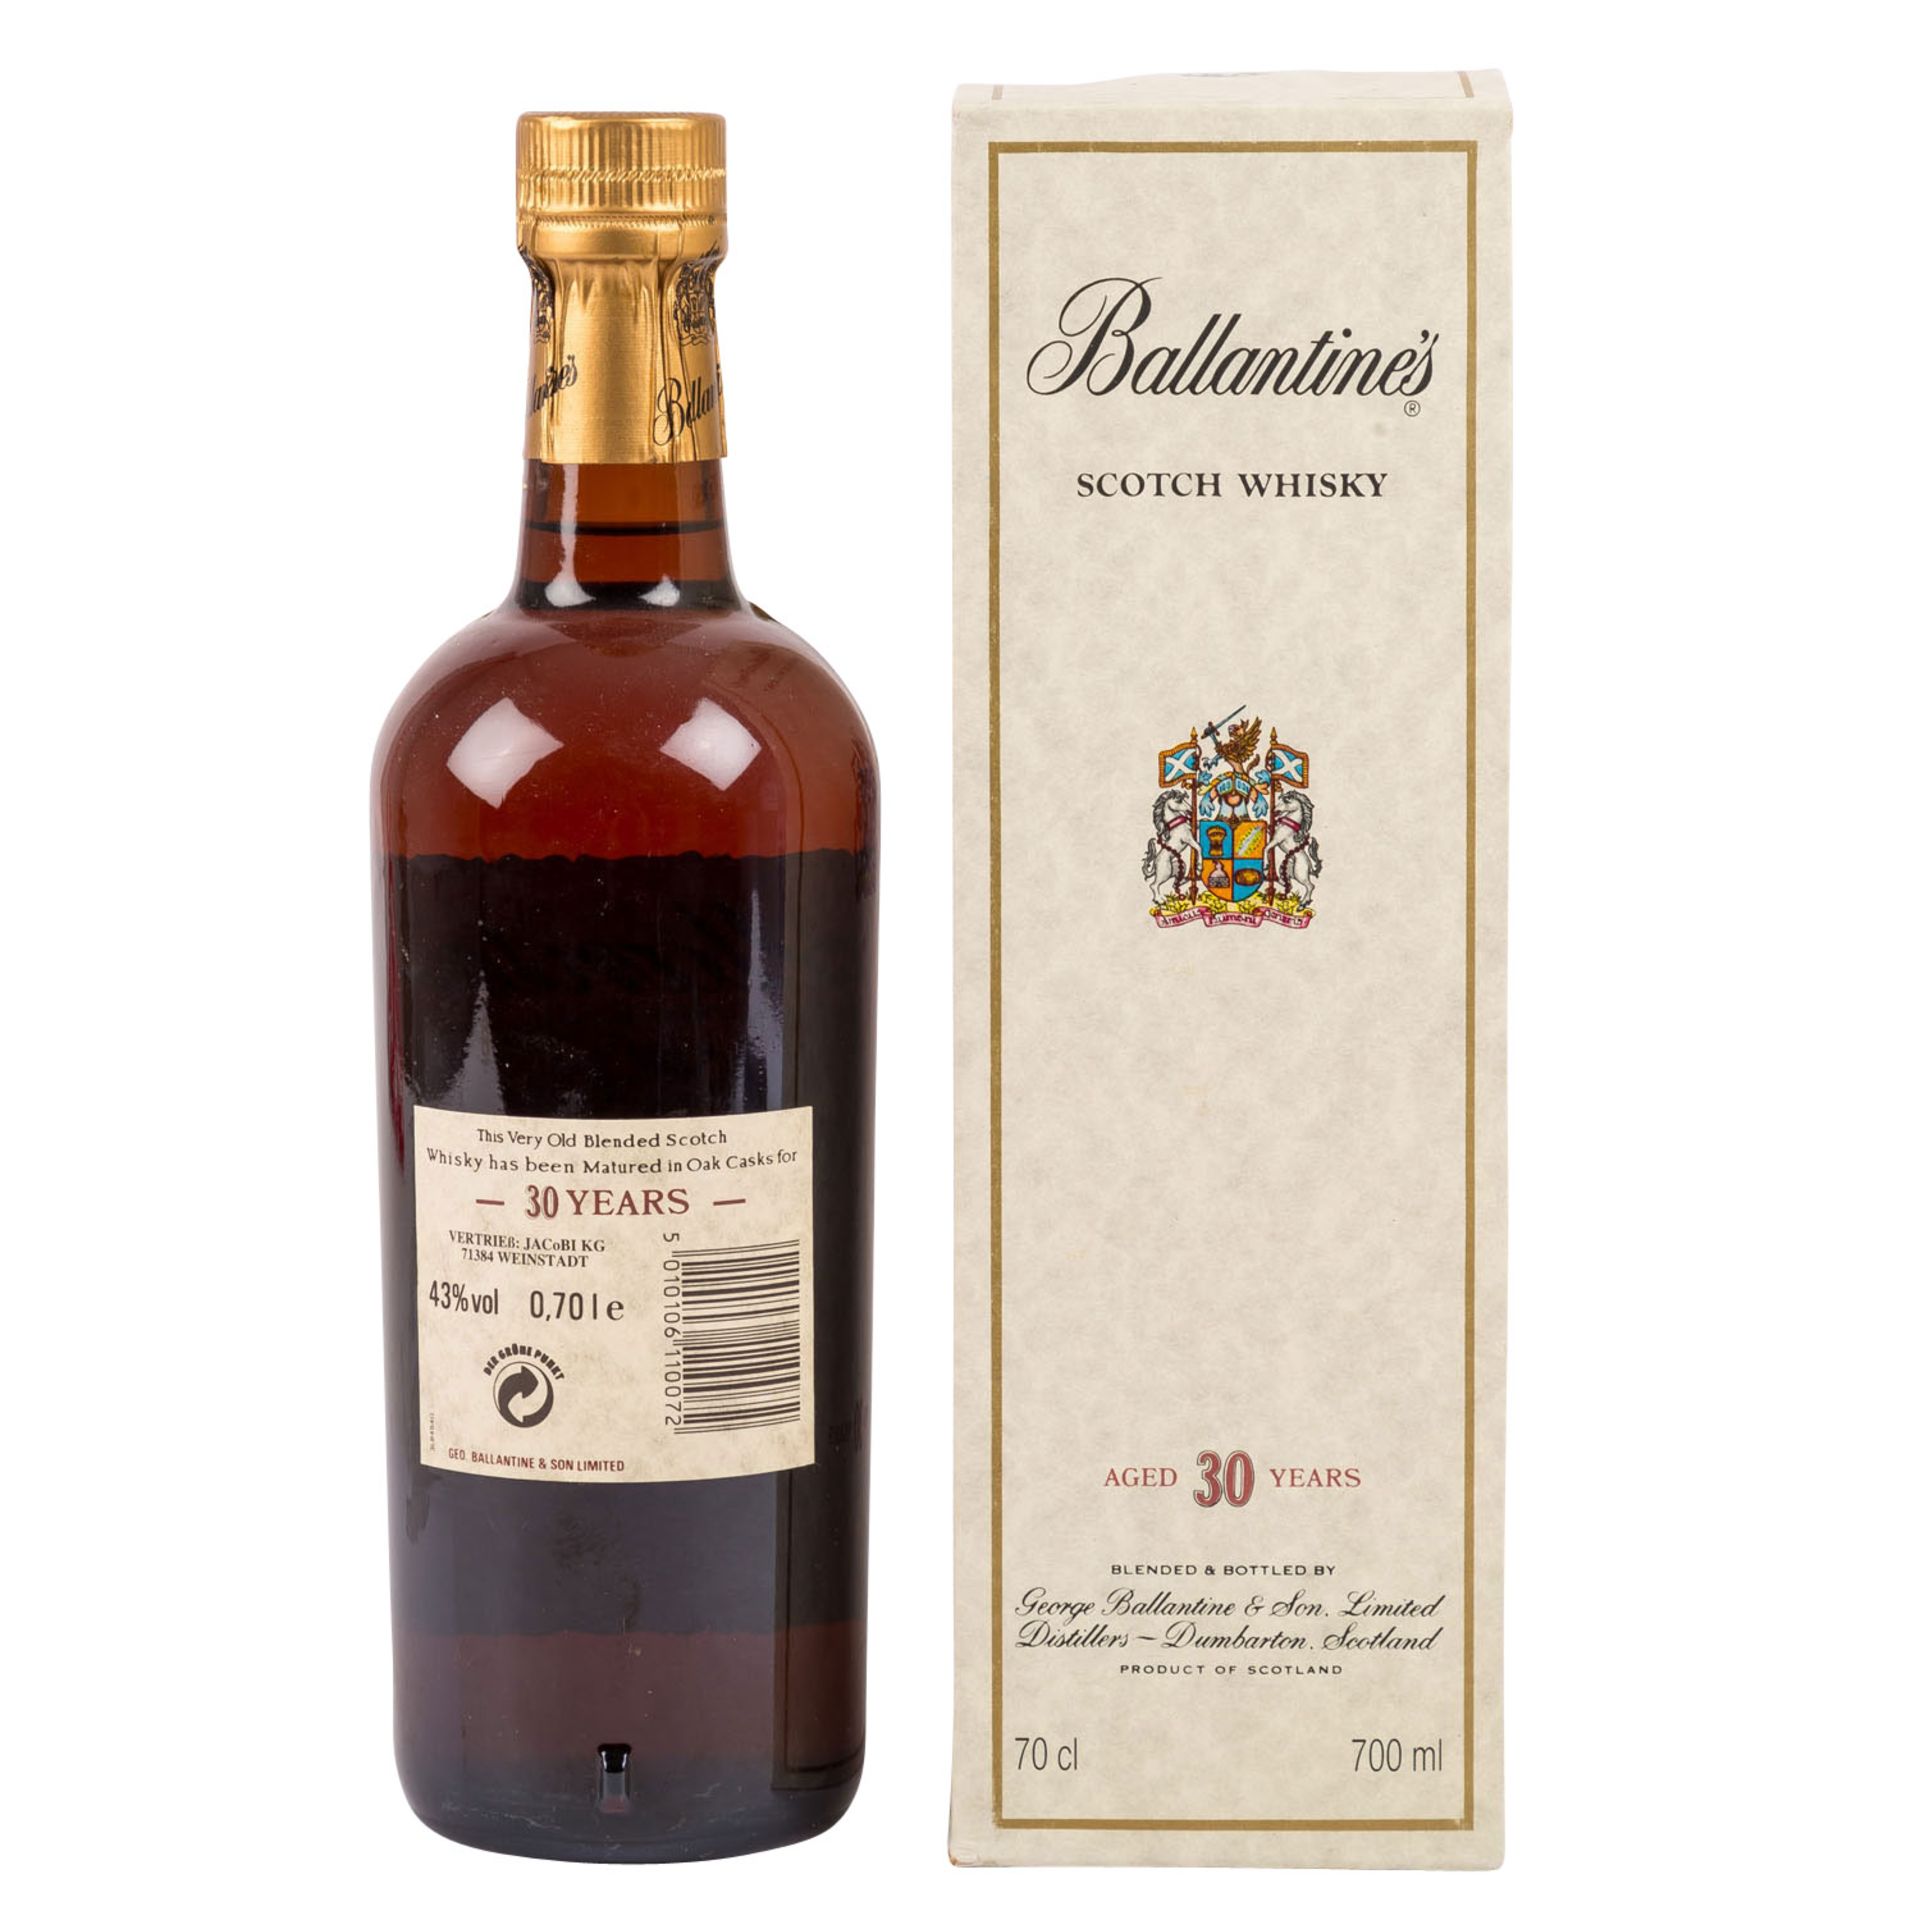 BALLANTINE'S blended 'very old' Scotch Whisky, 30 years - Image 2 of 3